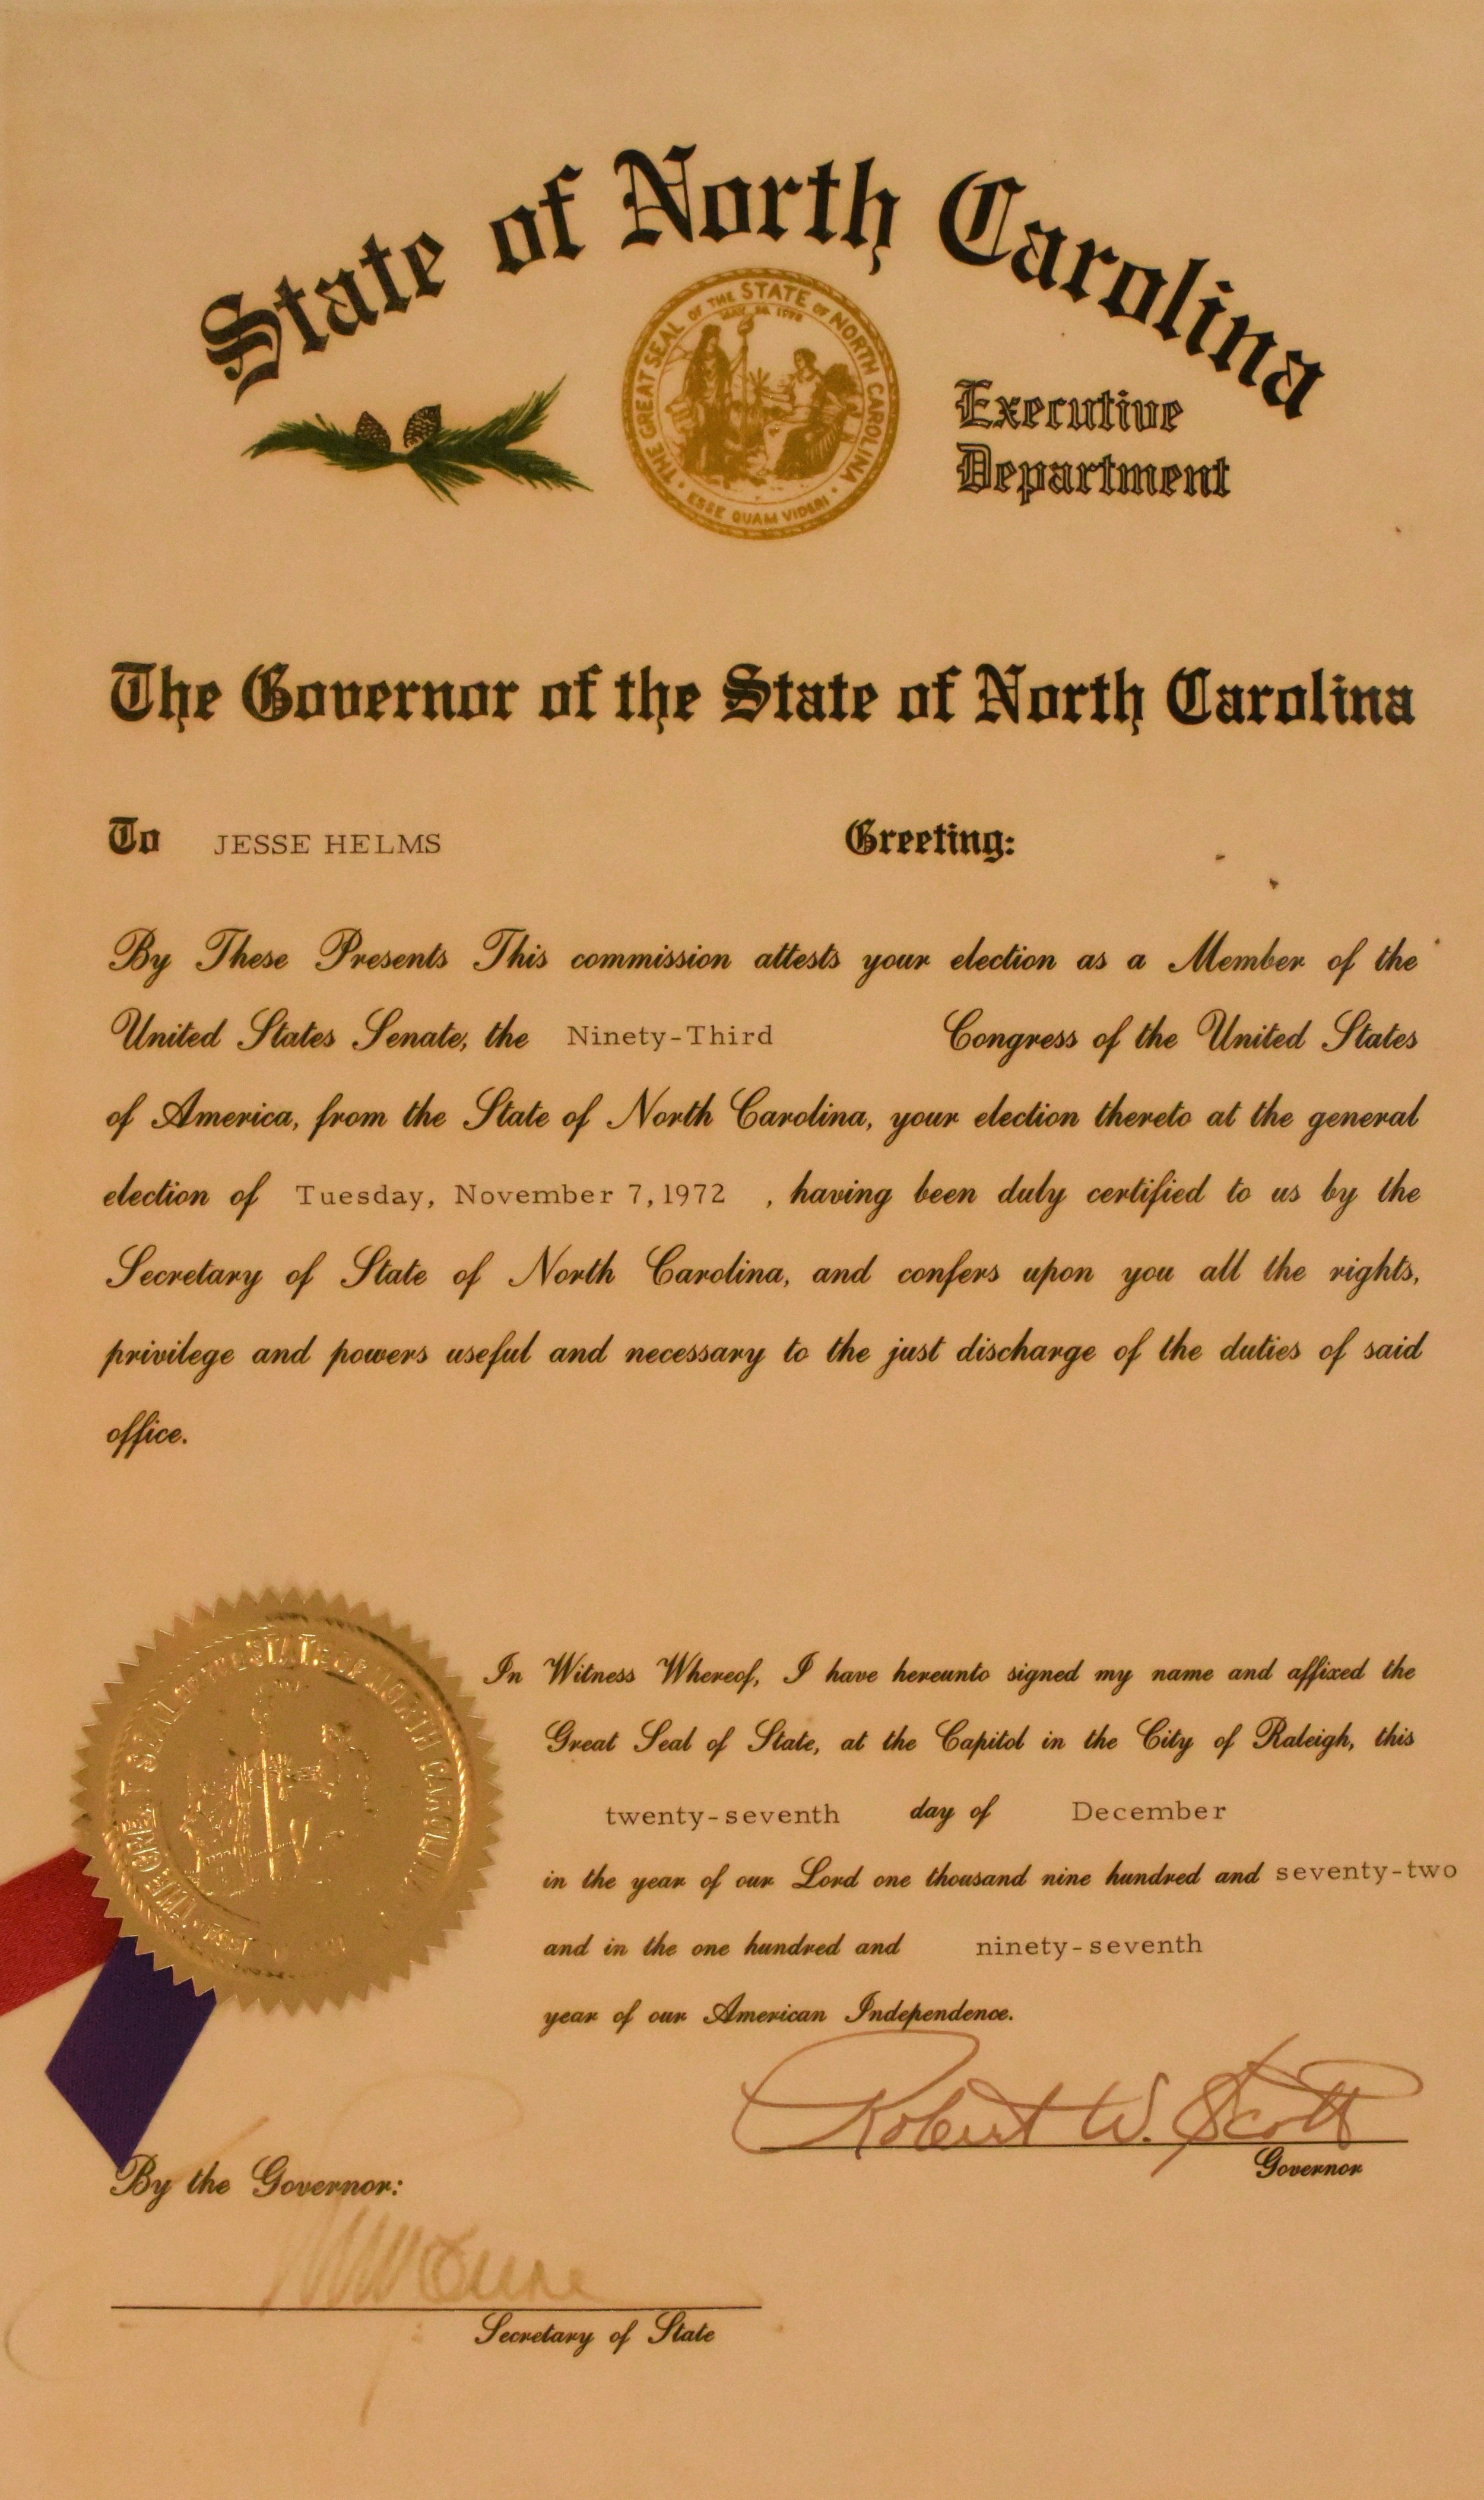 Governor Robert W. Scott signed the form that certified Jesse Helms was elected to the United States Senate on November 7, 1972.